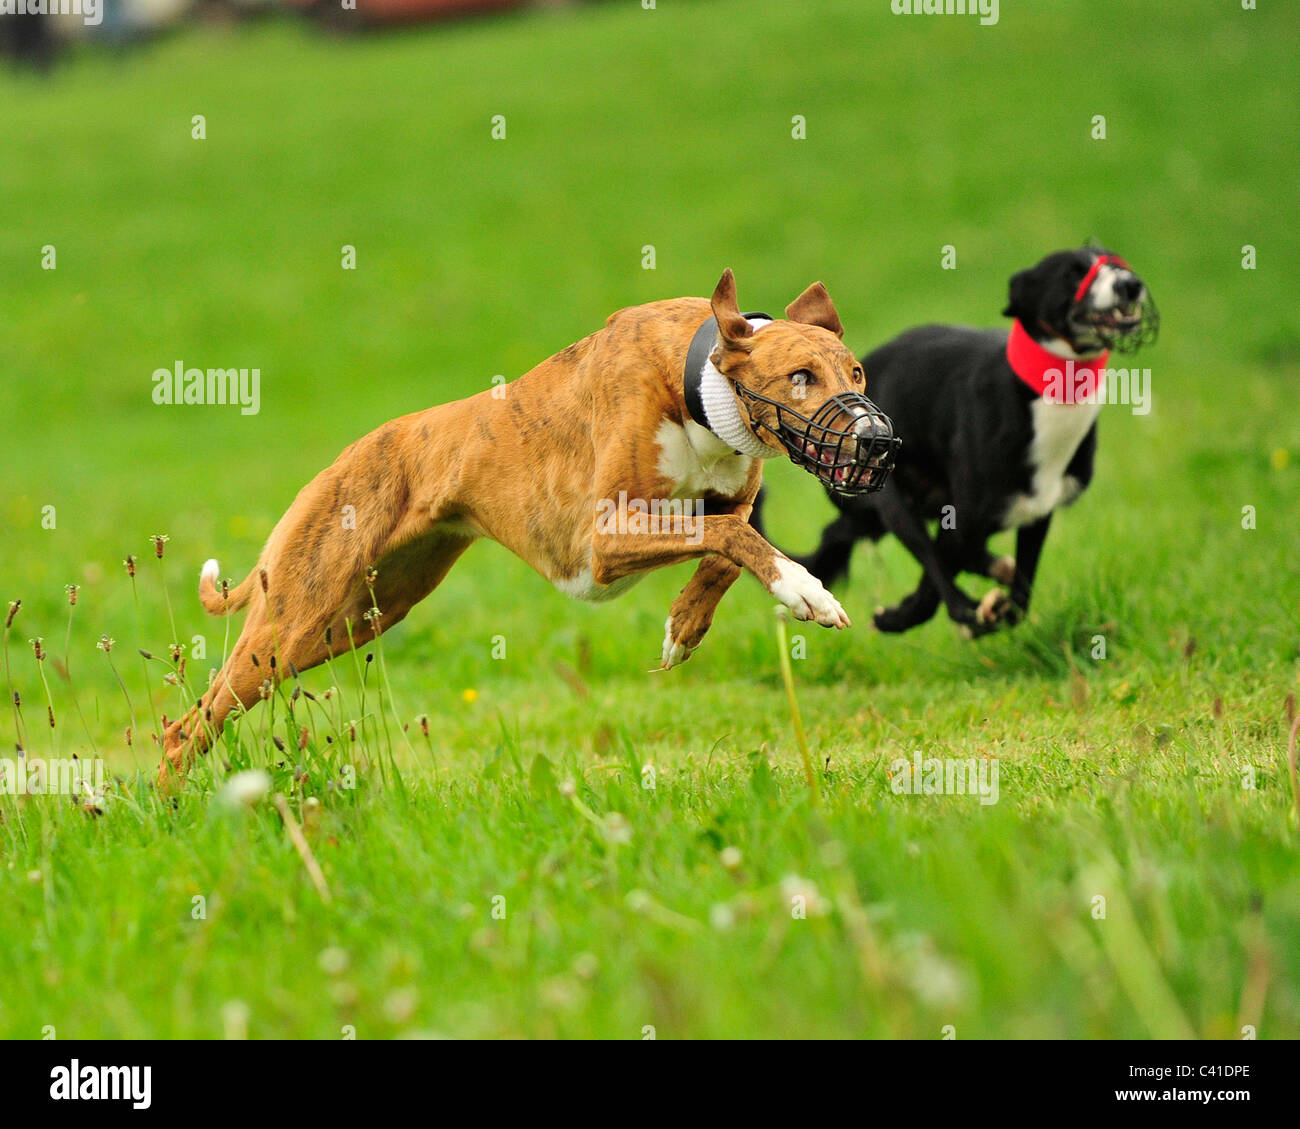 simulated coursing greyhounds Stock Photo